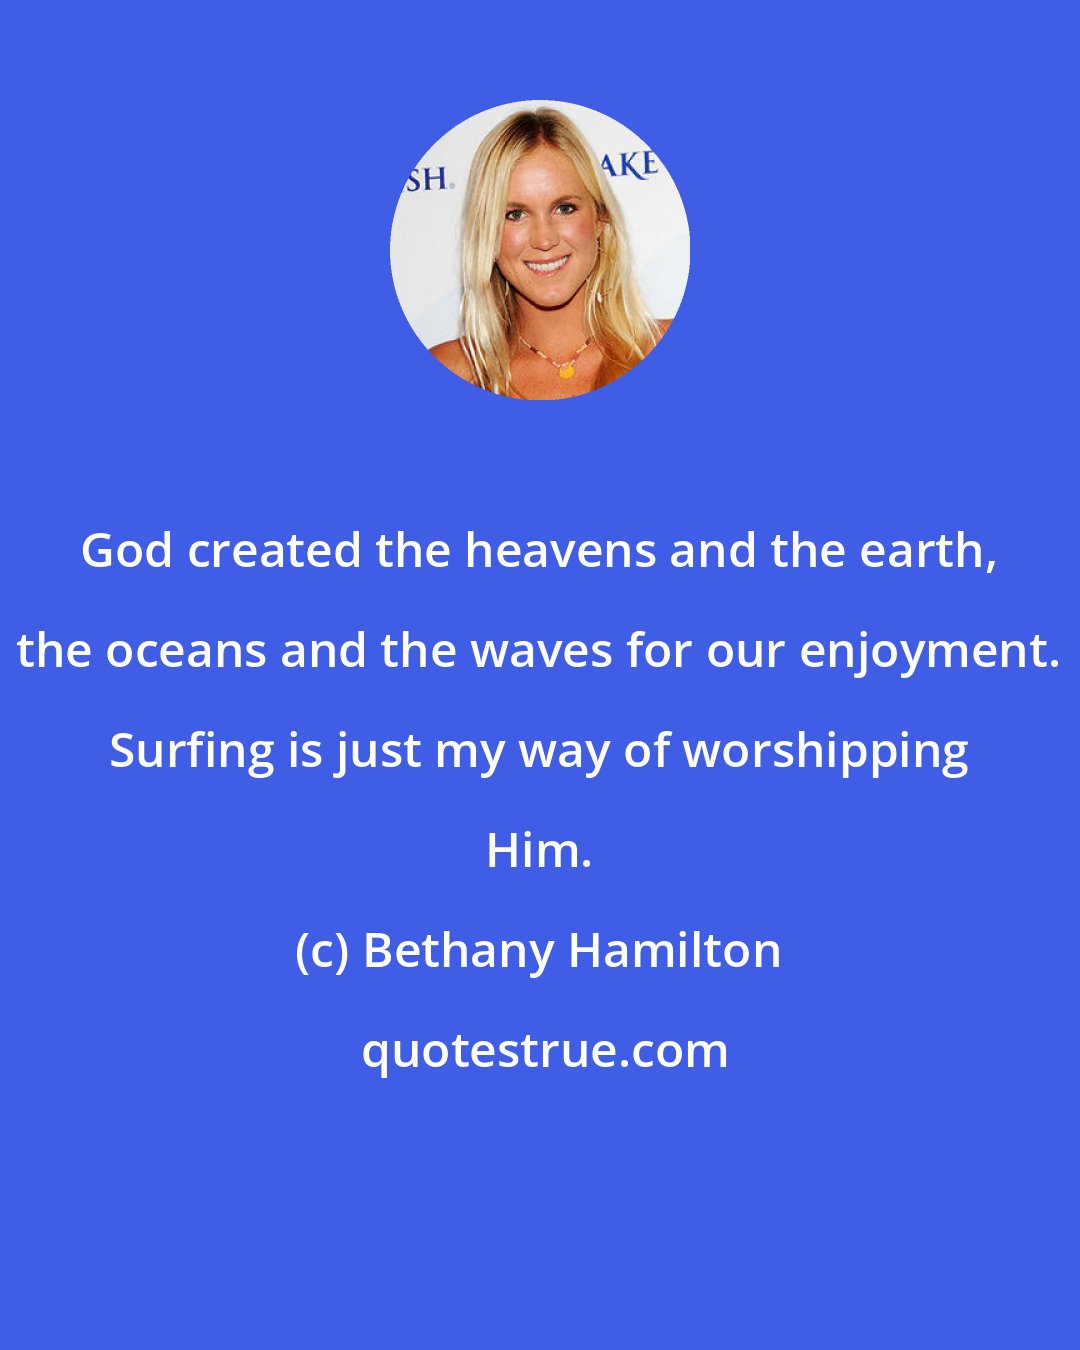 Bethany Hamilton: God created the heavens and the earth, the oceans and the waves for our enjoyment. Surfing is just my way of worshipping Him.